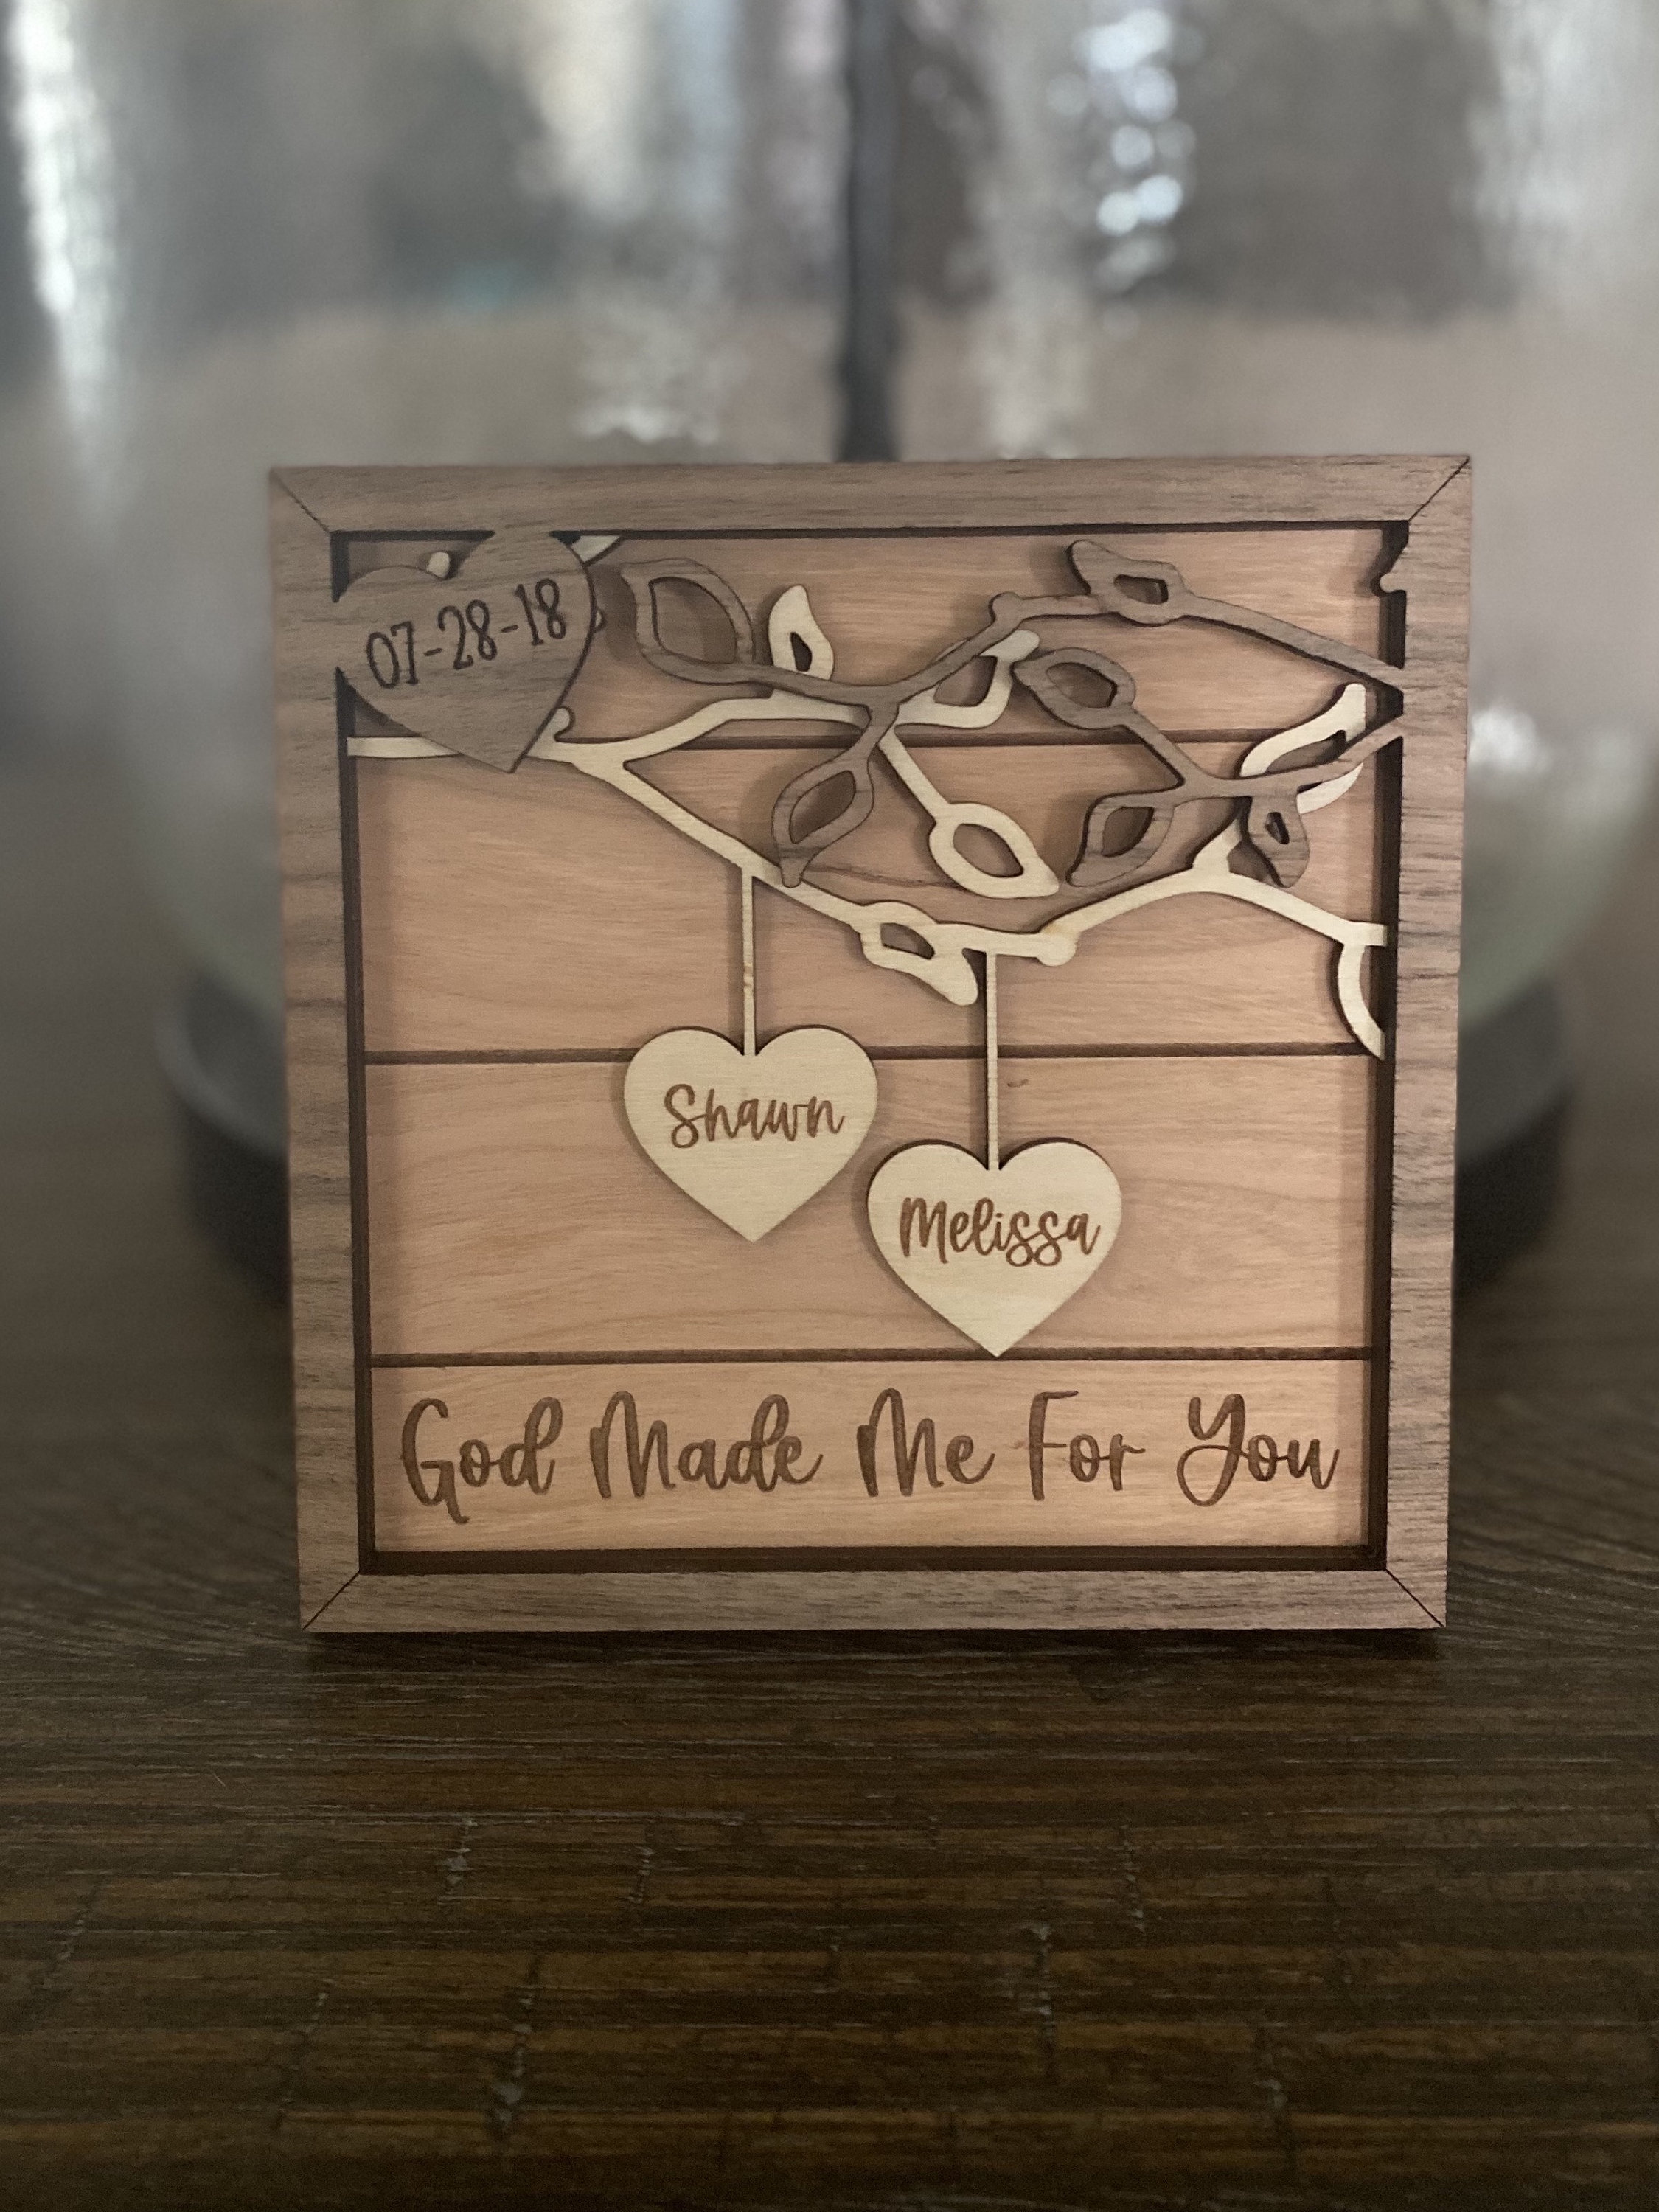  Personalized Wood Candle Holder Heart & Infinity Symbol  Engraved Custom Names Save the Date Wedding Gift Anniversary Gift Table  Centerpiece Home Decor Love Candle Holder Newlywed Gift for Couple : Home